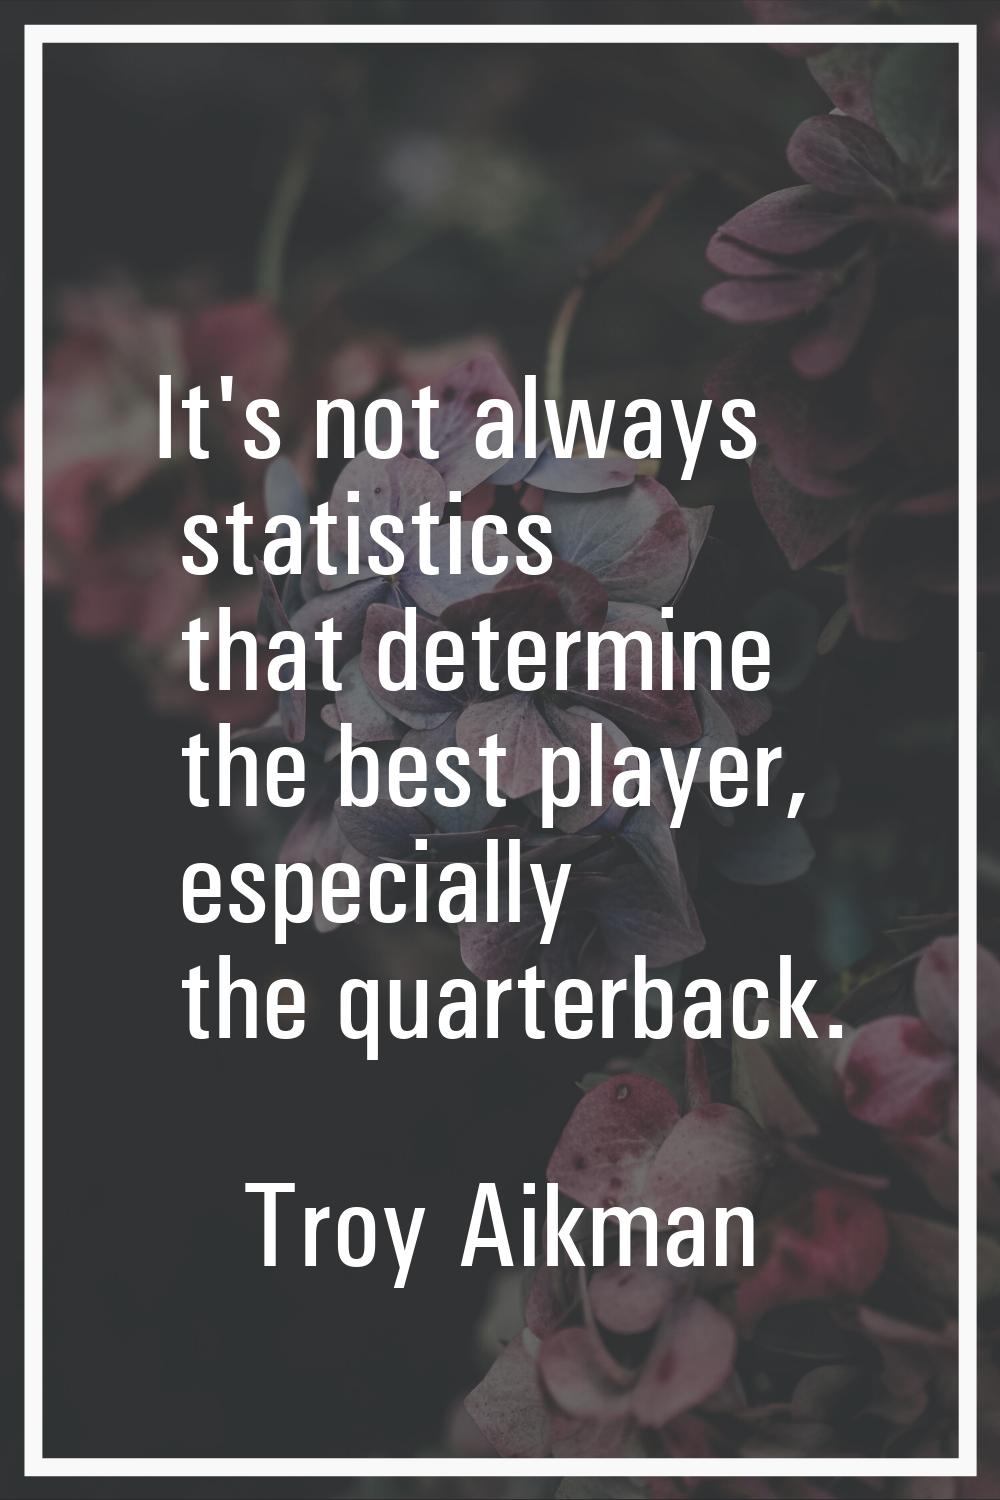 It's not always statistics that determine the best player, especially the quarterback.